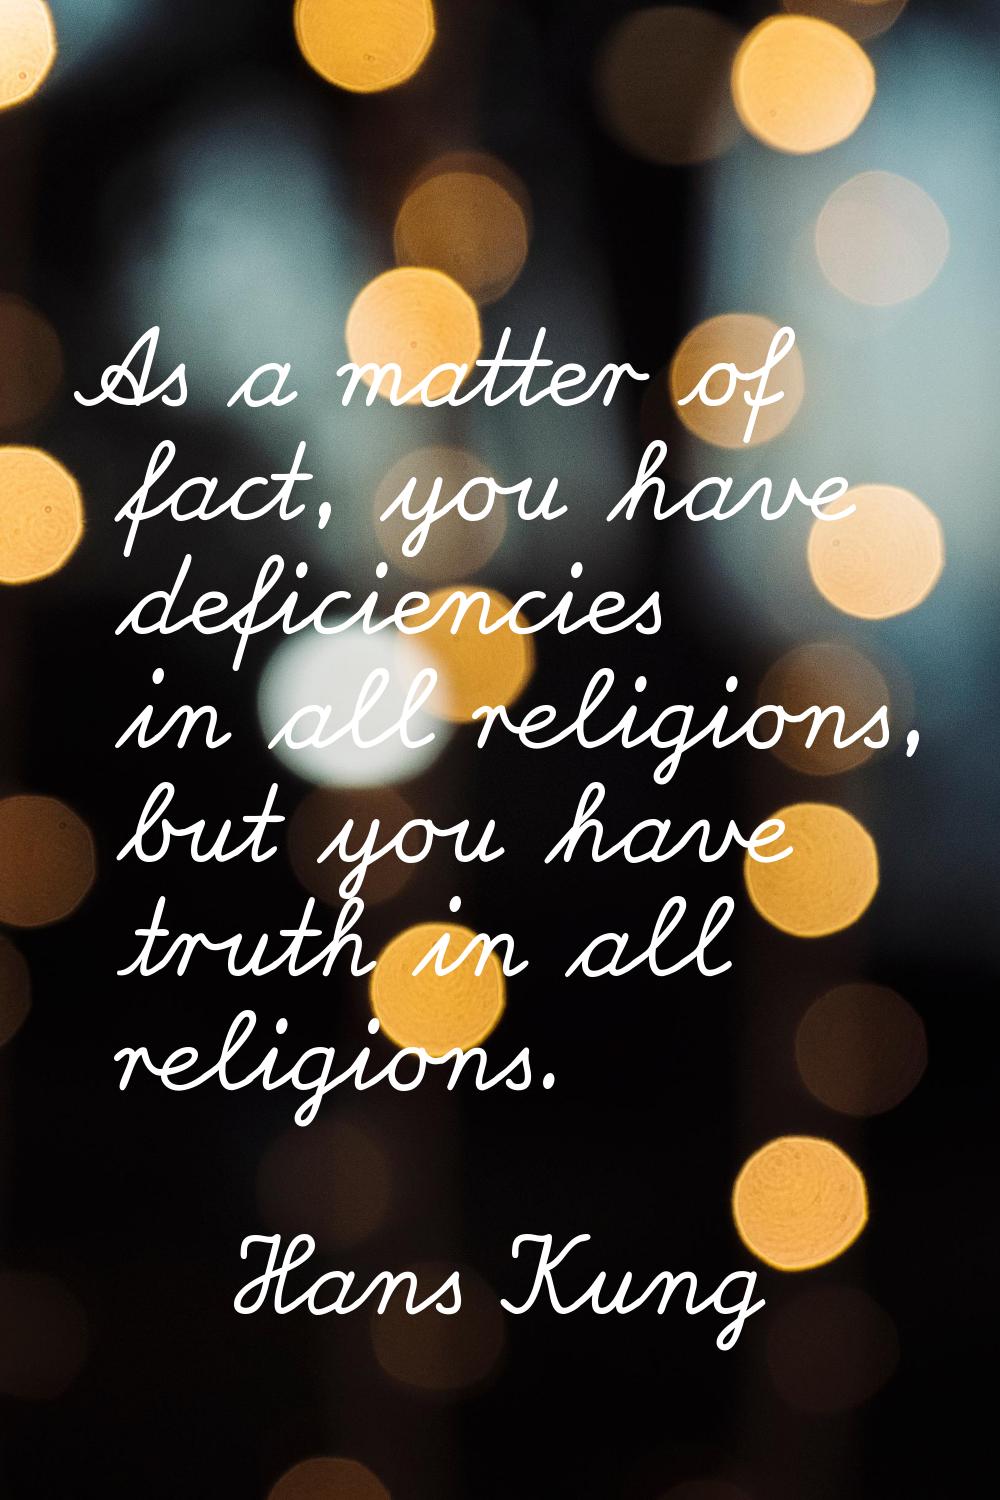 As a matter of fact, you have deficiencies in all religions, but you have truth in all religions.